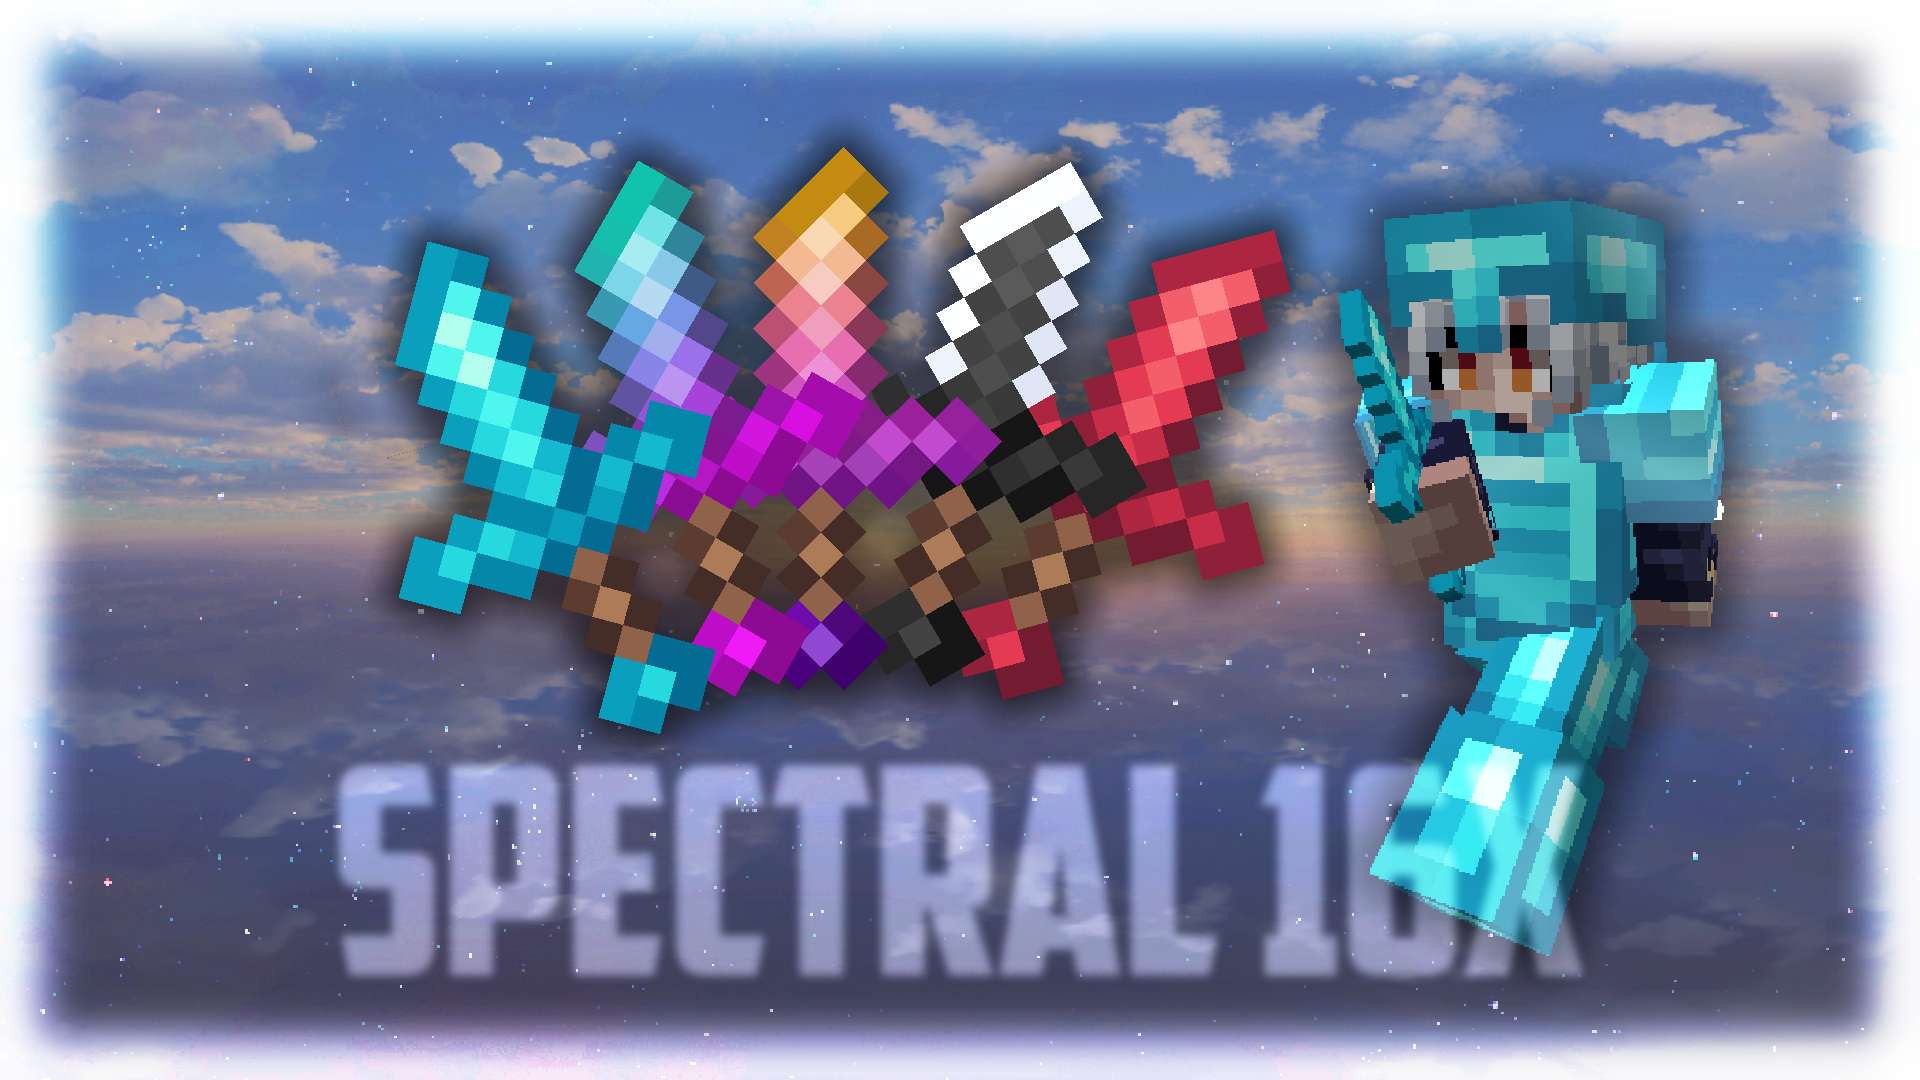 Spectral - Marine 16x by Zlax on PvPRP